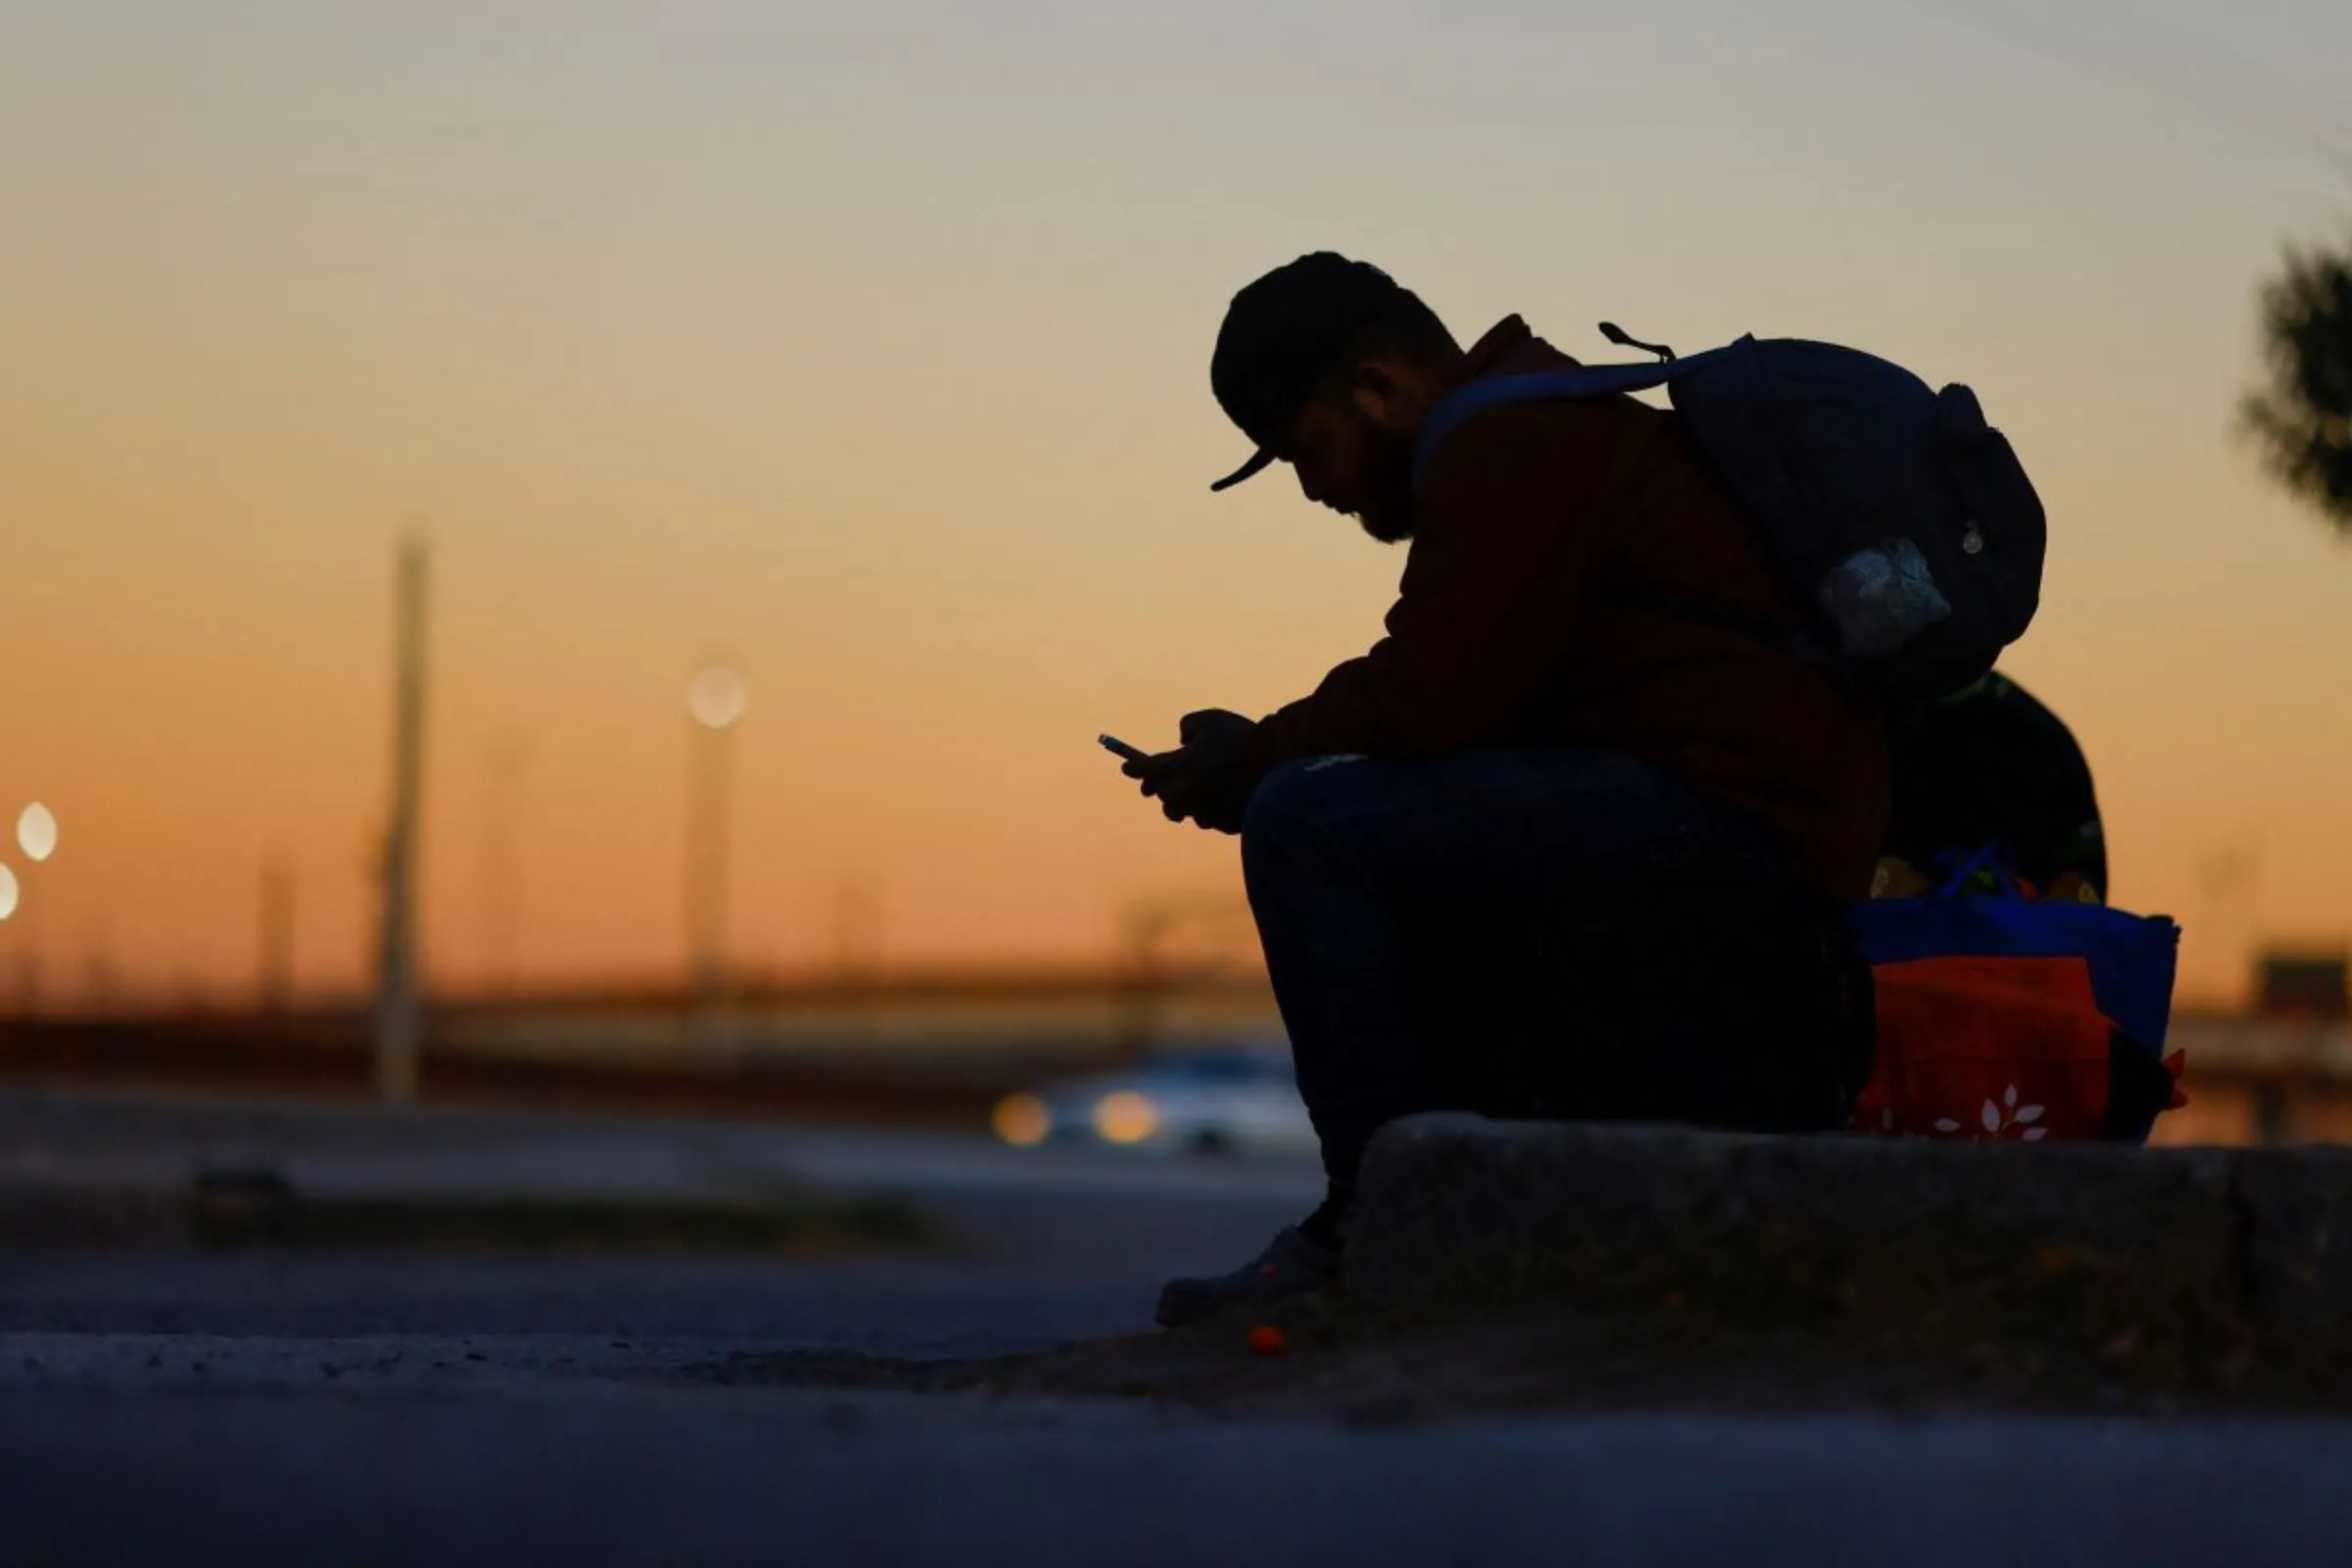 A migrant seeking asylum in the U.S. uses his phone to access the CBP One App in Ciudad Juarez, Mexico, January 12, 2023. REUTERS/Jose Luis Gonzalez